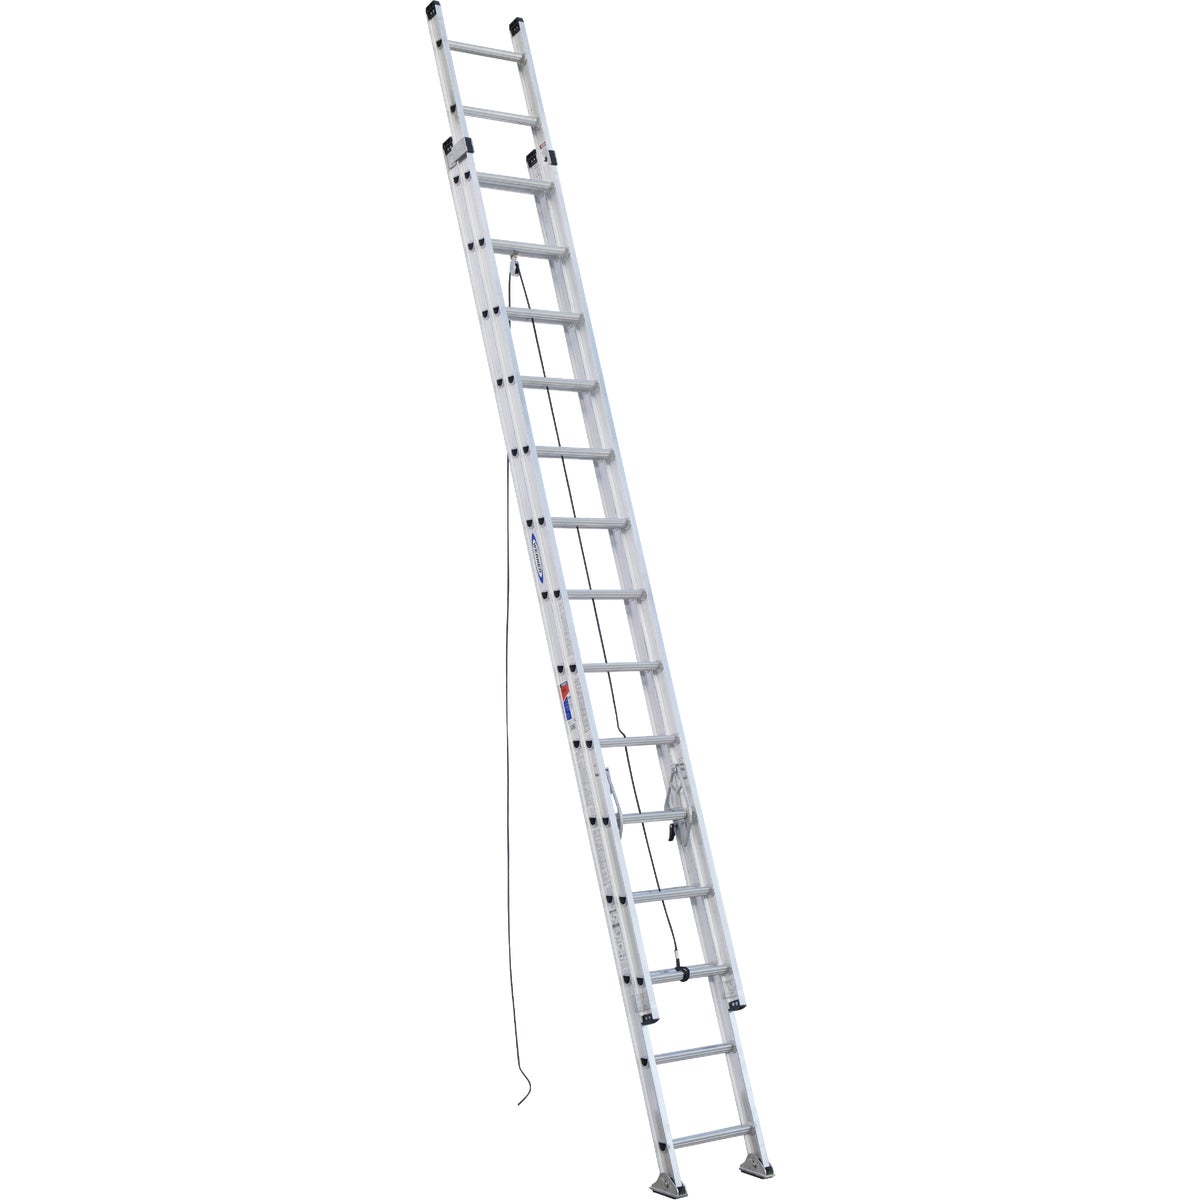 Werner 28 Ft. Aluminum Extension Ladder with 300 Lb. Load Capacity Type IA Duty Rating